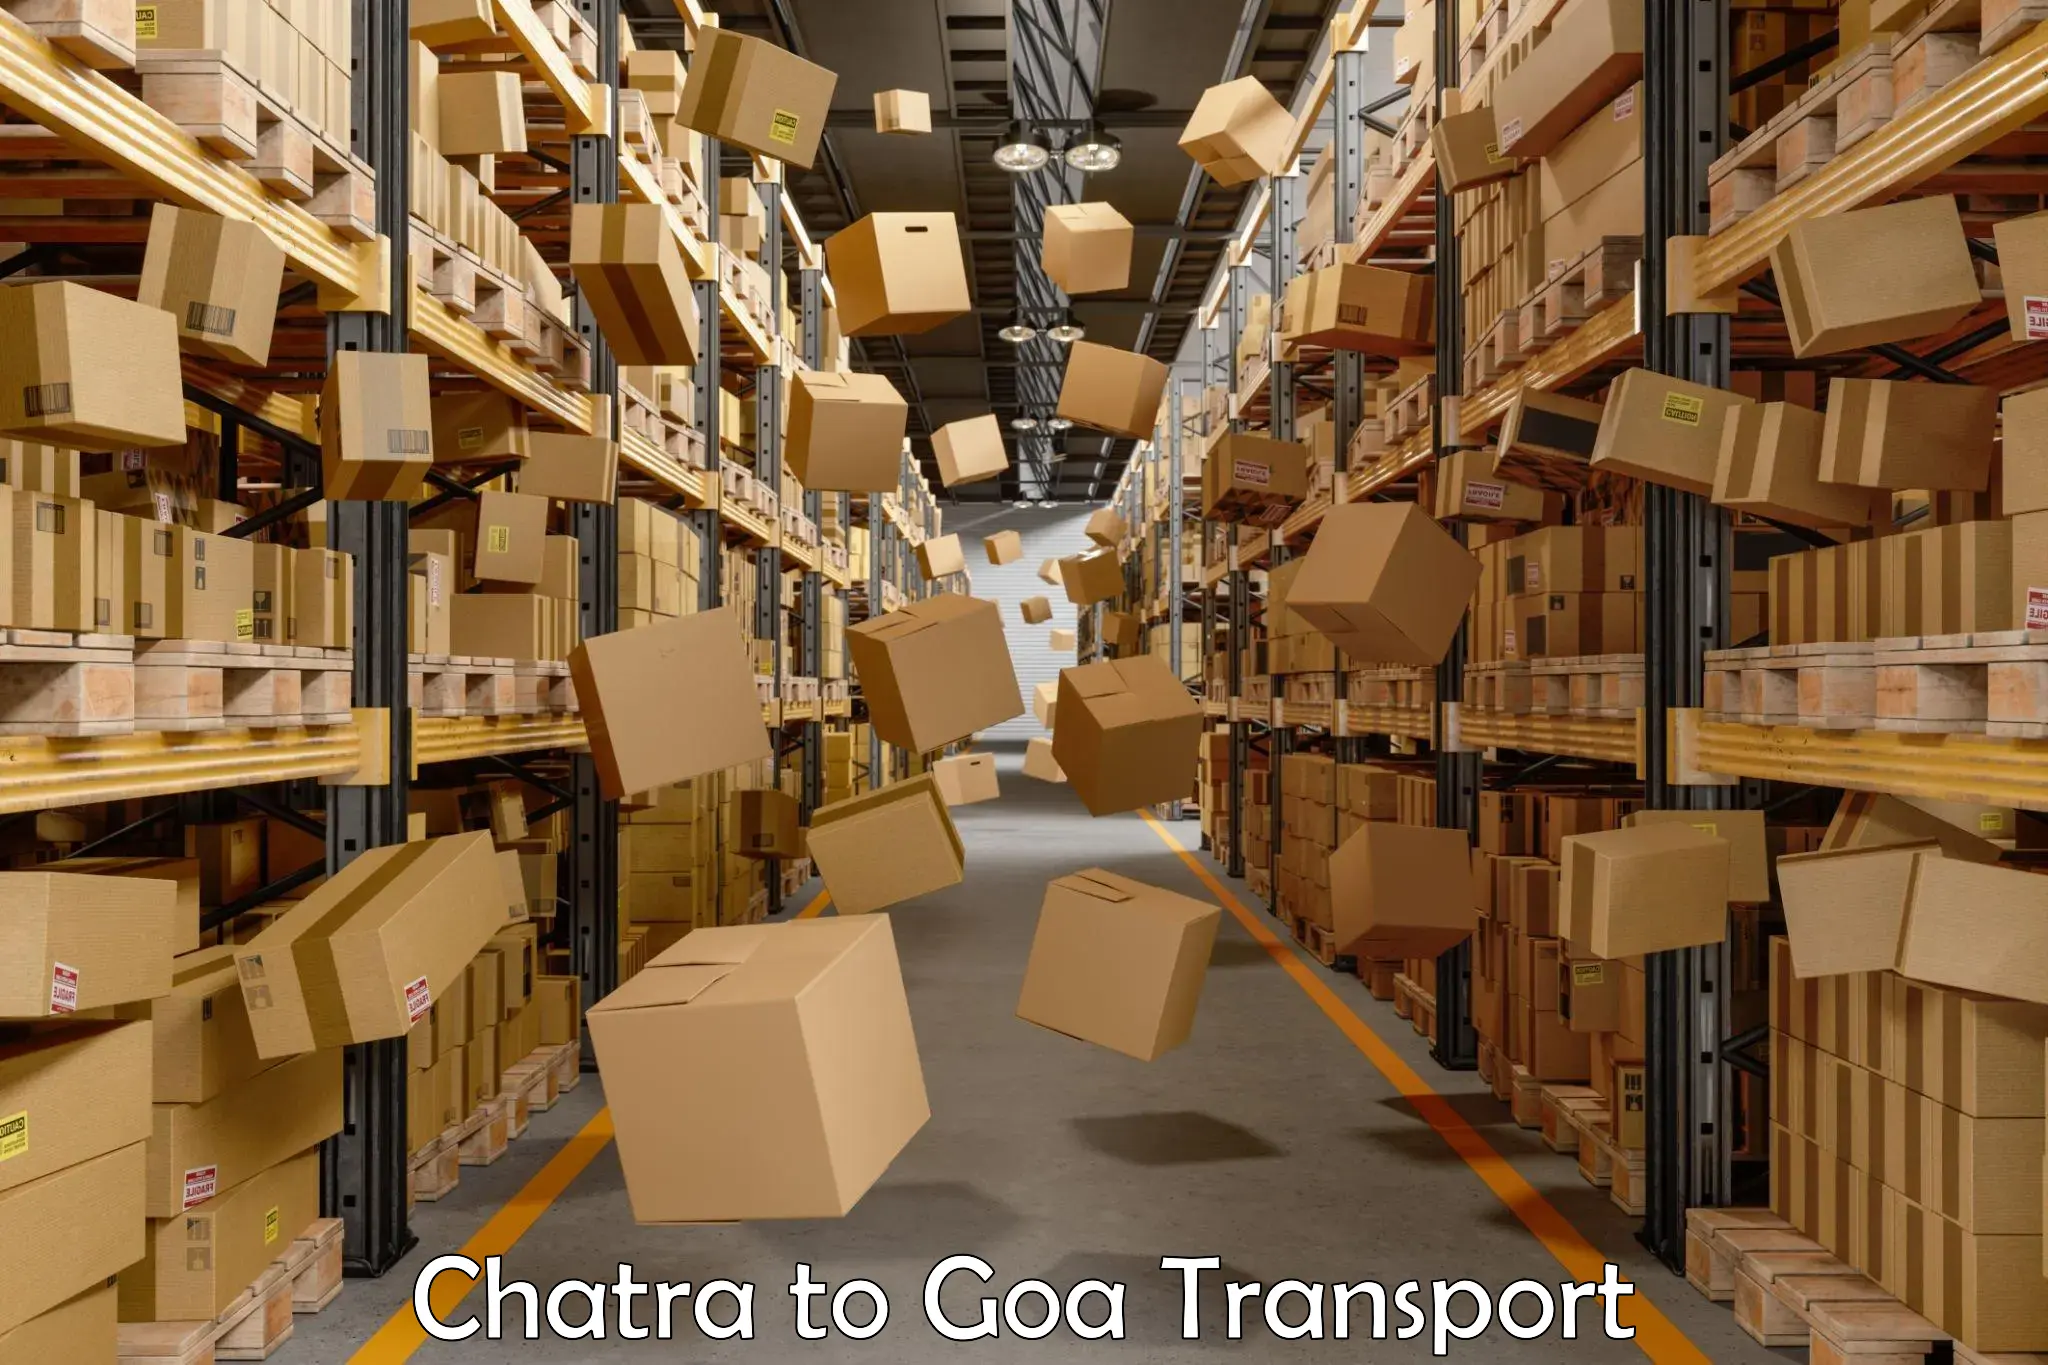 Commercial transport service Chatra to Goa